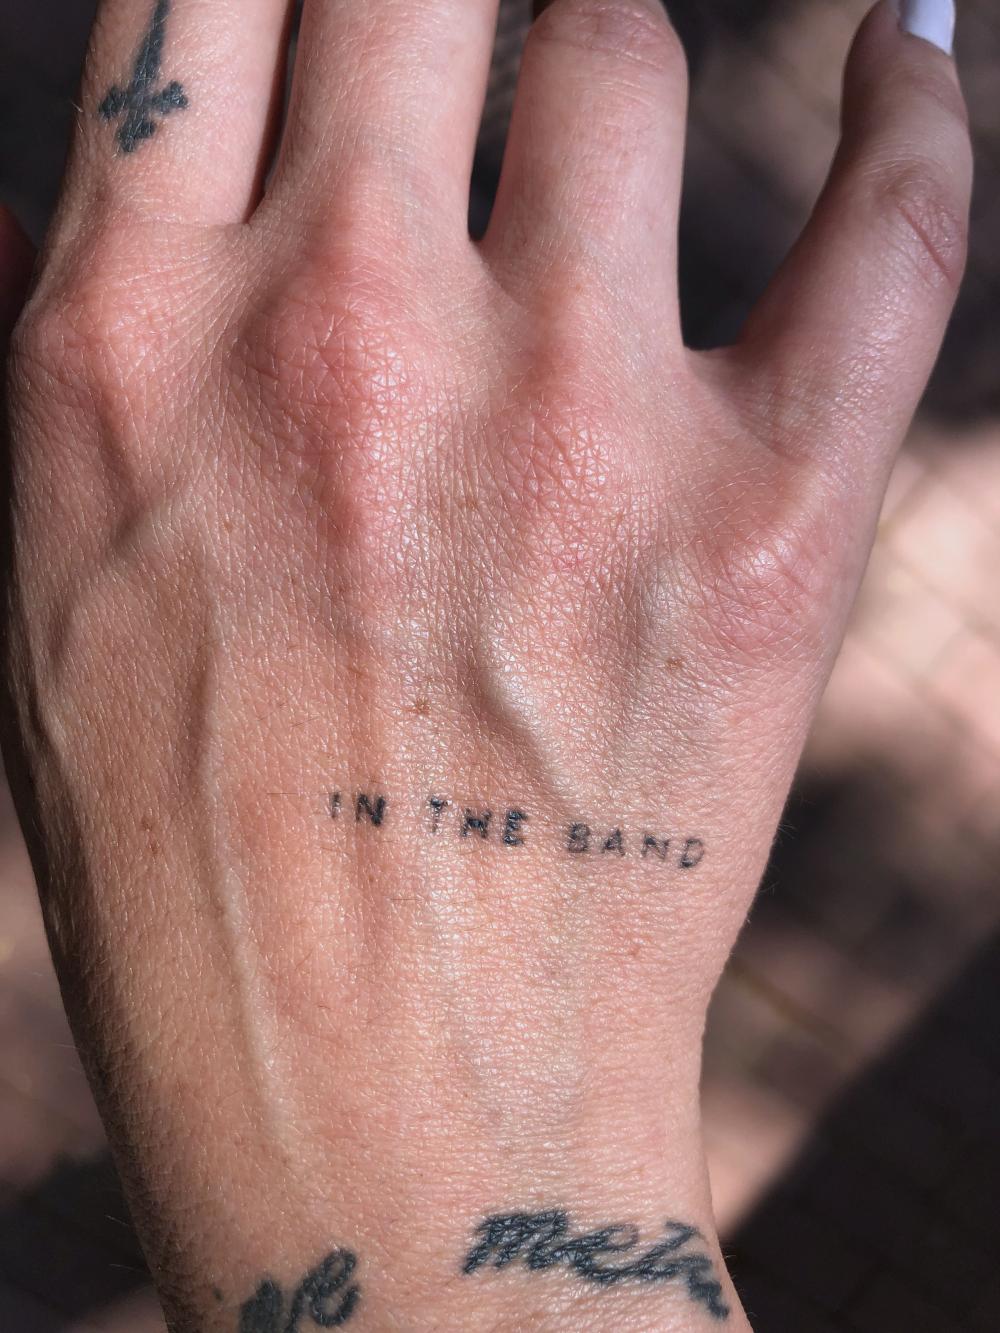 A hand tattoo shows the words 'in the band'